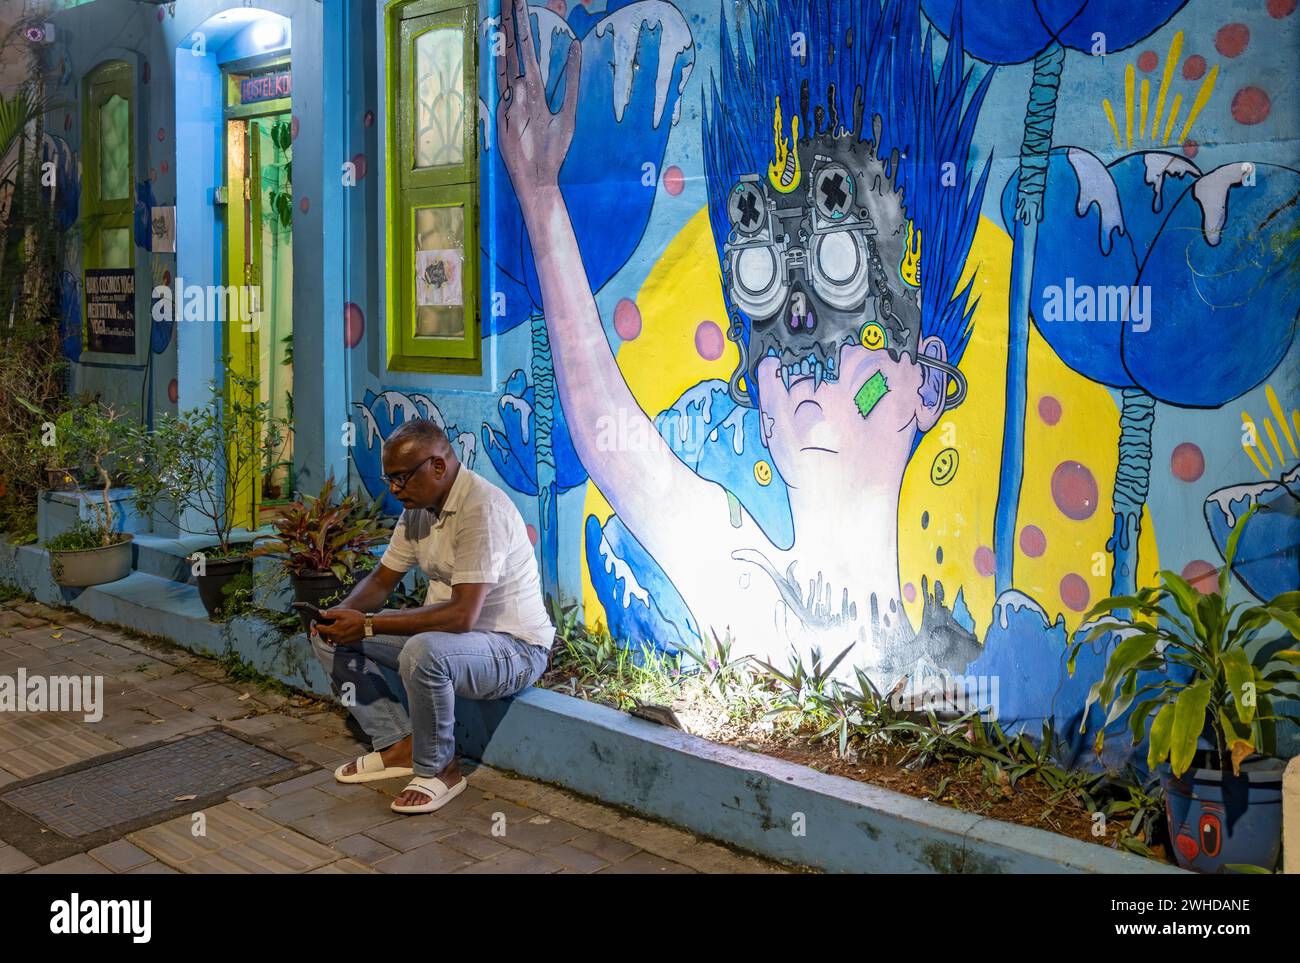 Man sits on a curb in front of illuminated street art in the streets of Fort Kochi, Cochin, Kerala, India Stock Photo